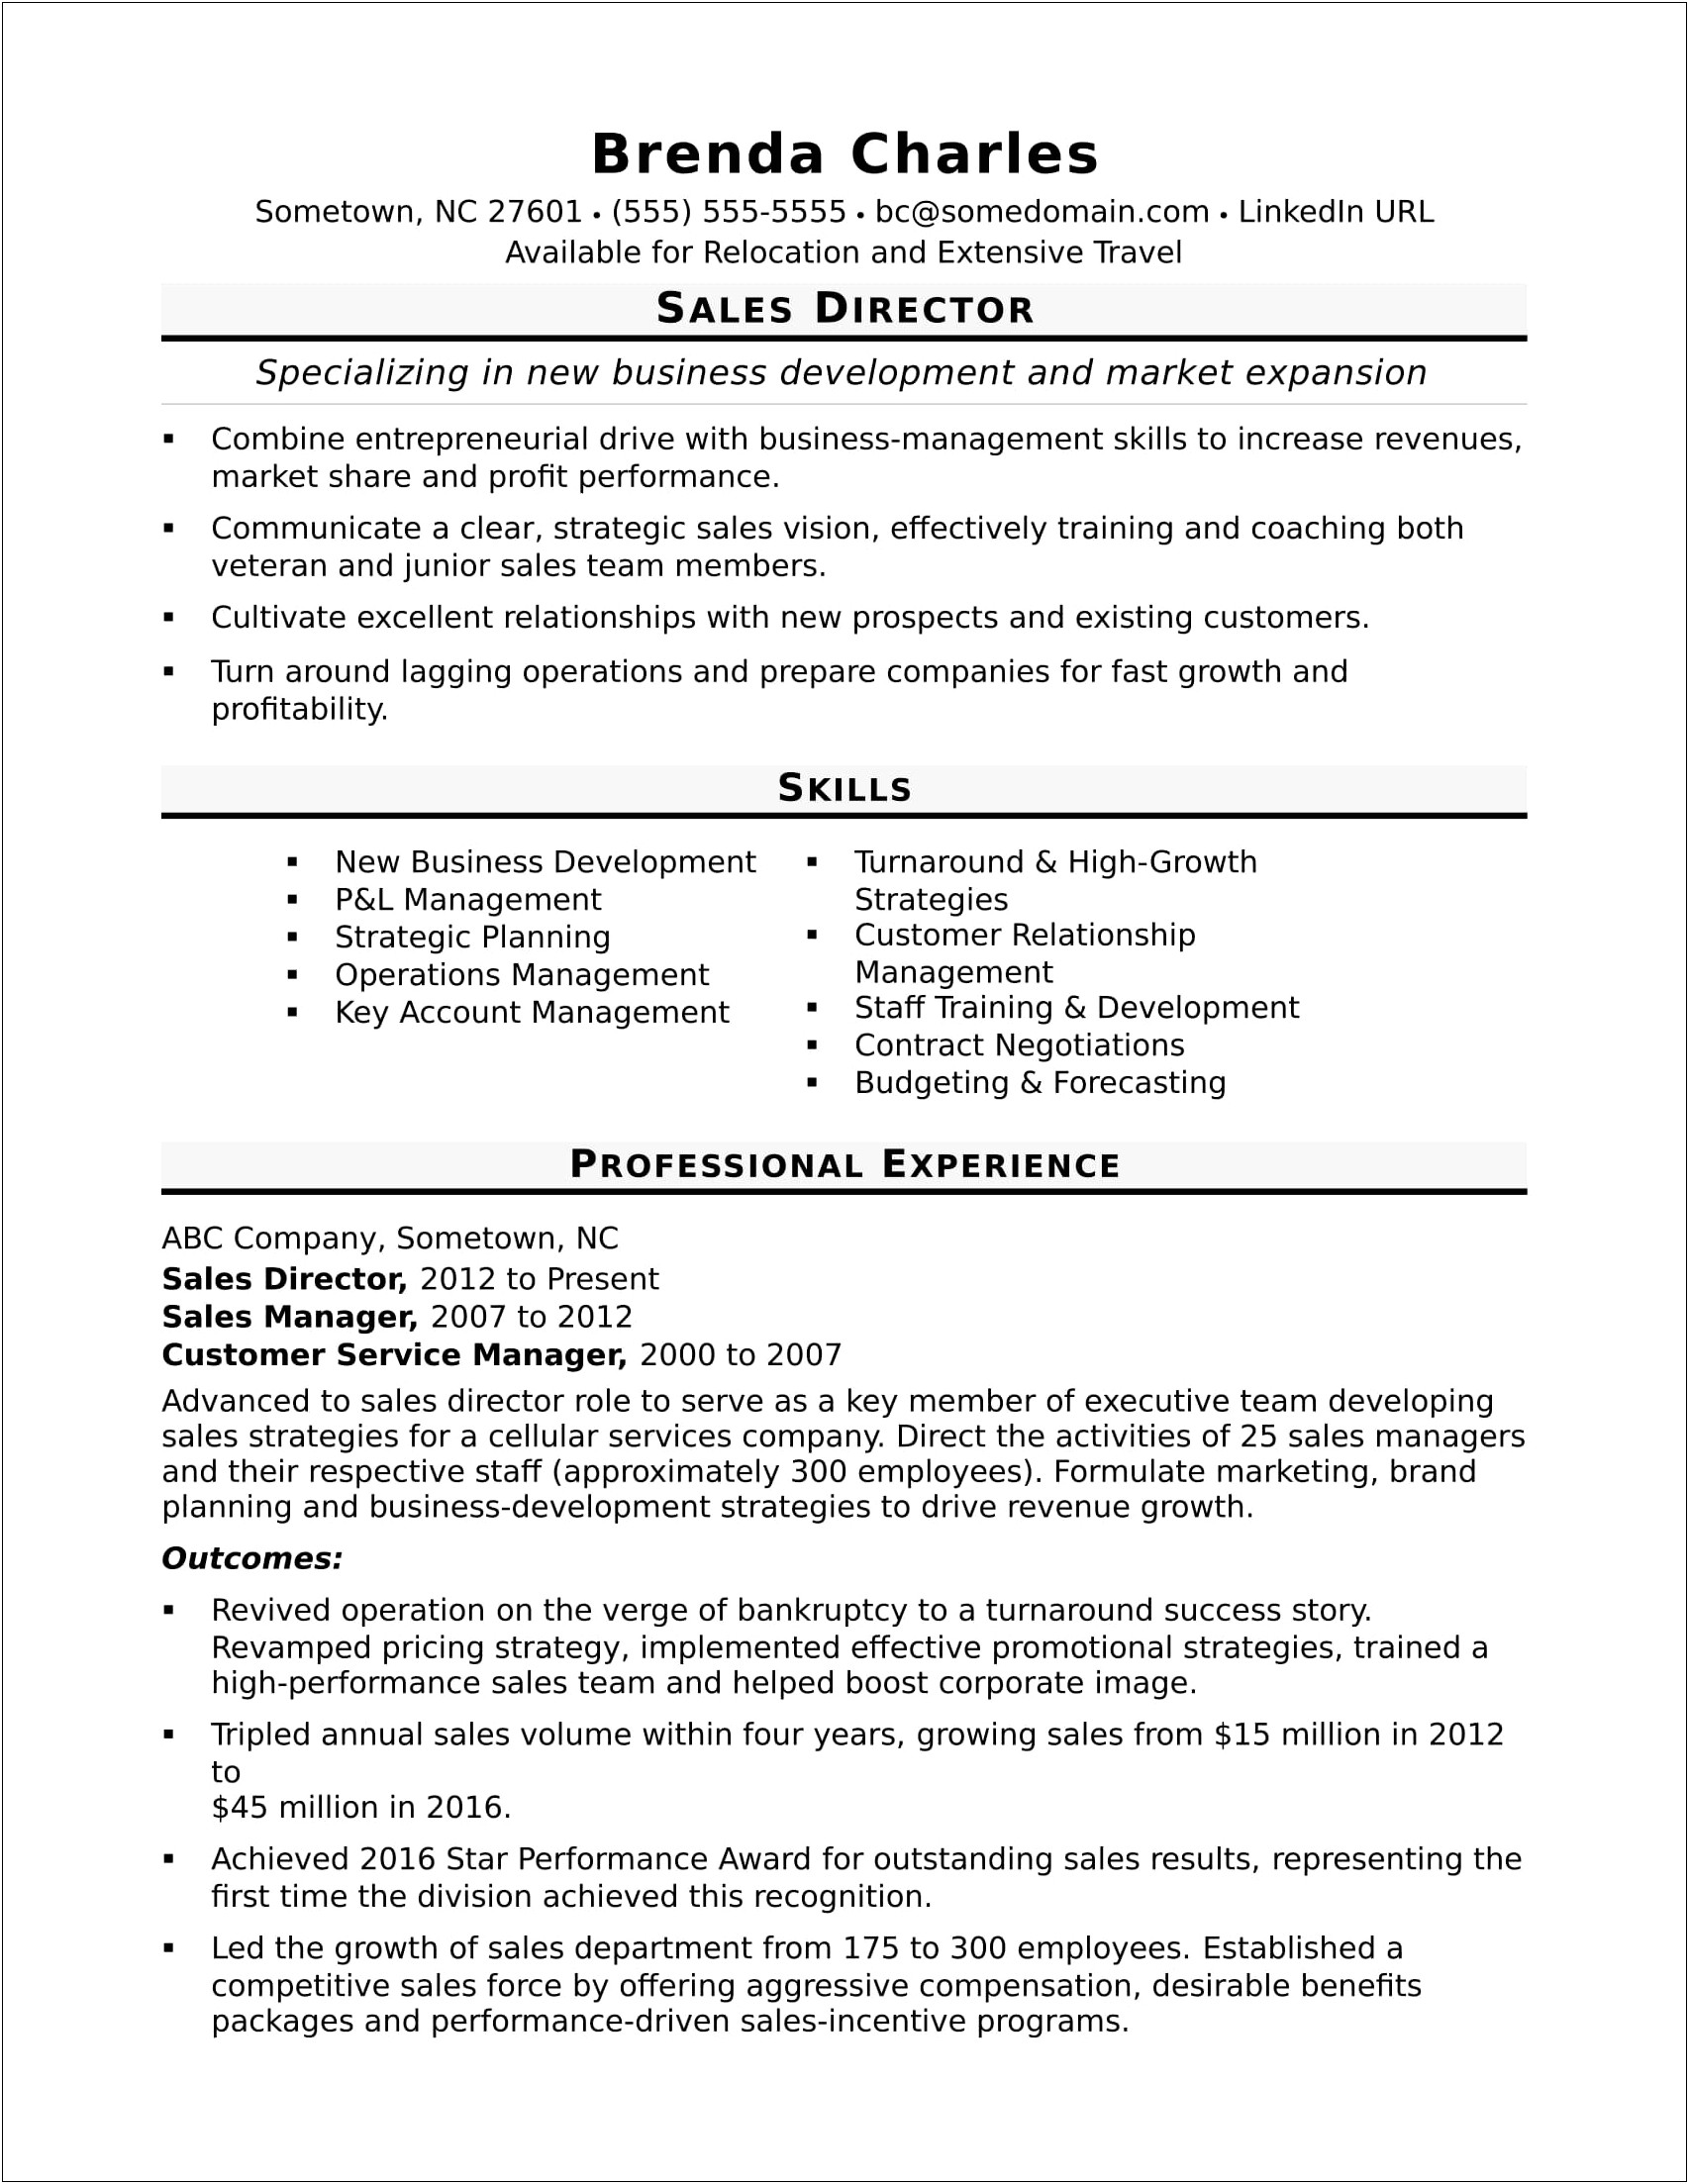 Resume Skills For Director Of Sales